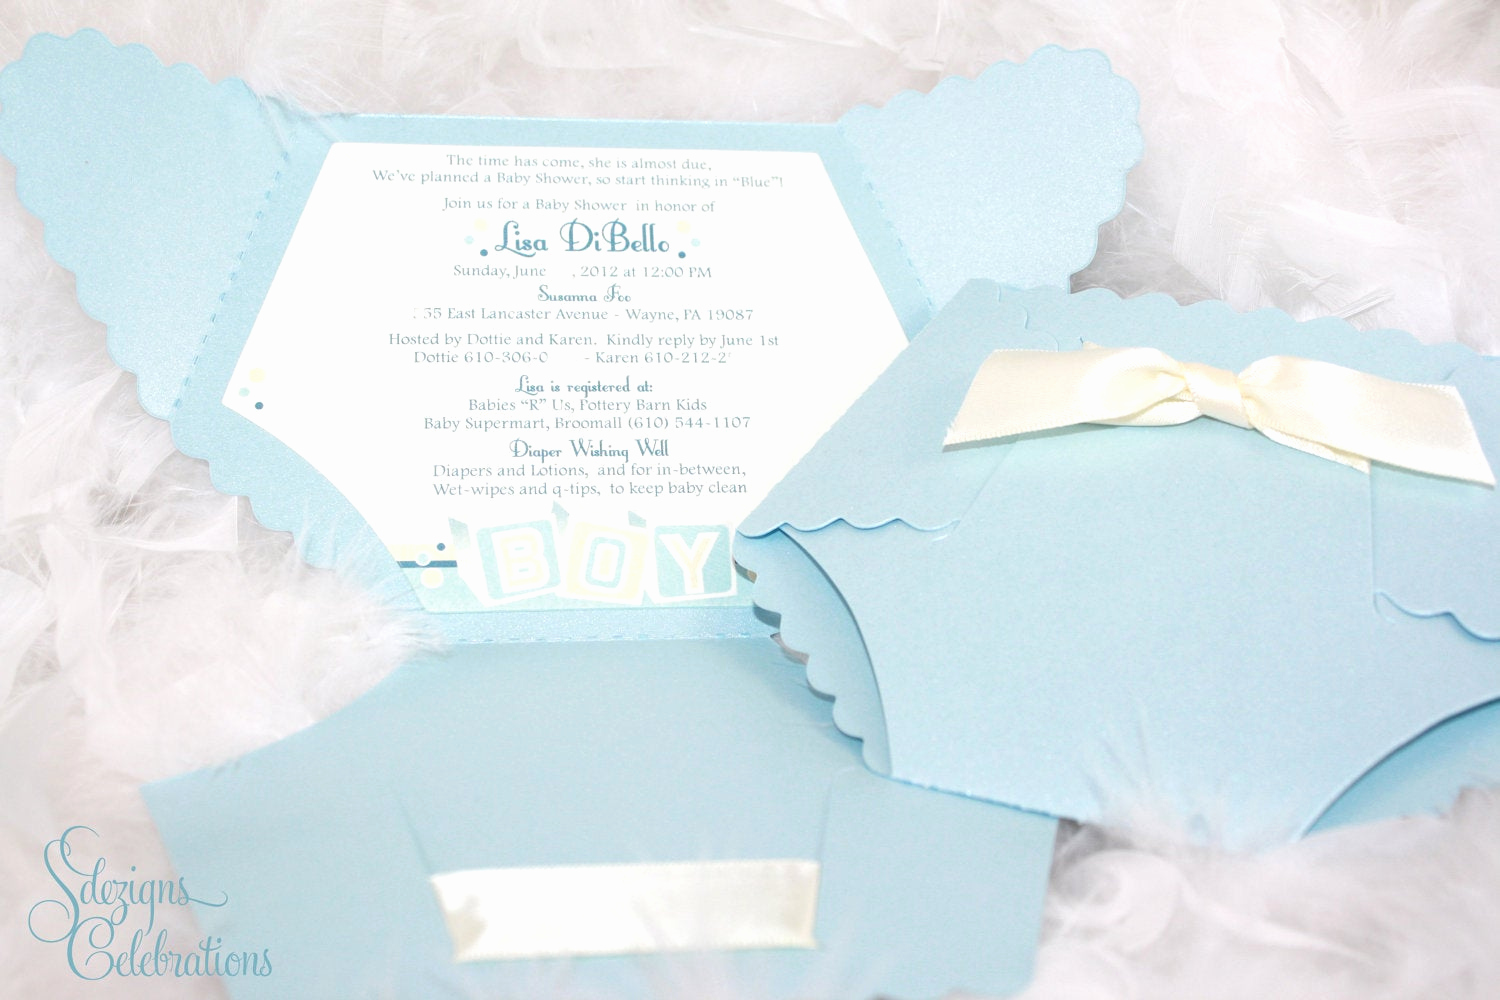 Diaper Baby Shower Invitation Template Beautiful Diaper Baby Shower Invitation Baby Block Design by Sdezigns